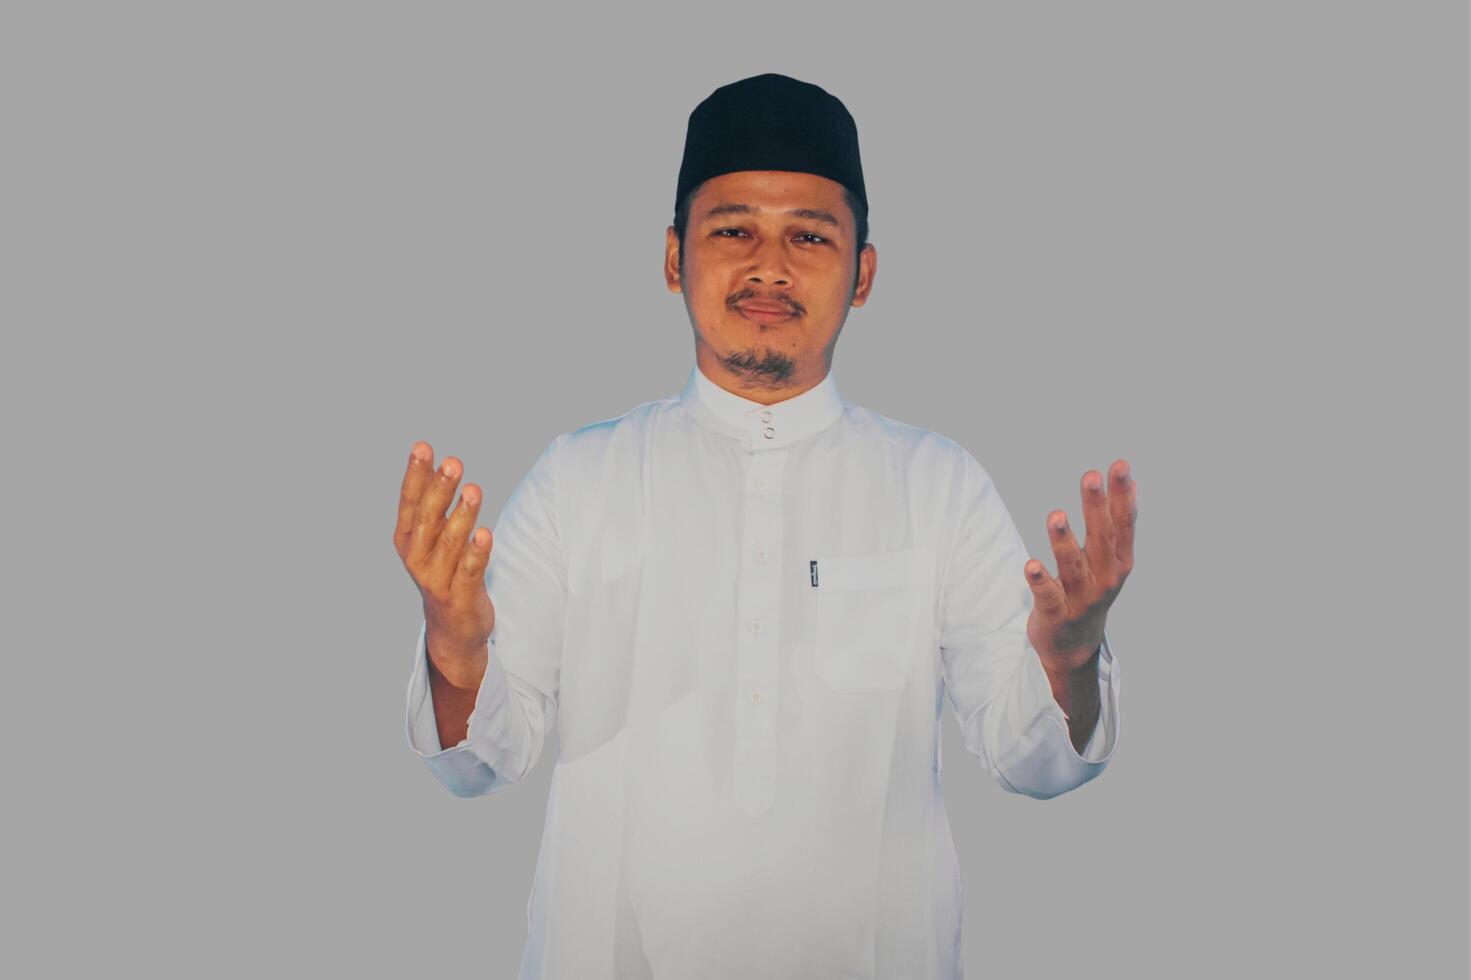 Moslem Asian man seriously prayer at the camera with arms open doing prayer gesture photo